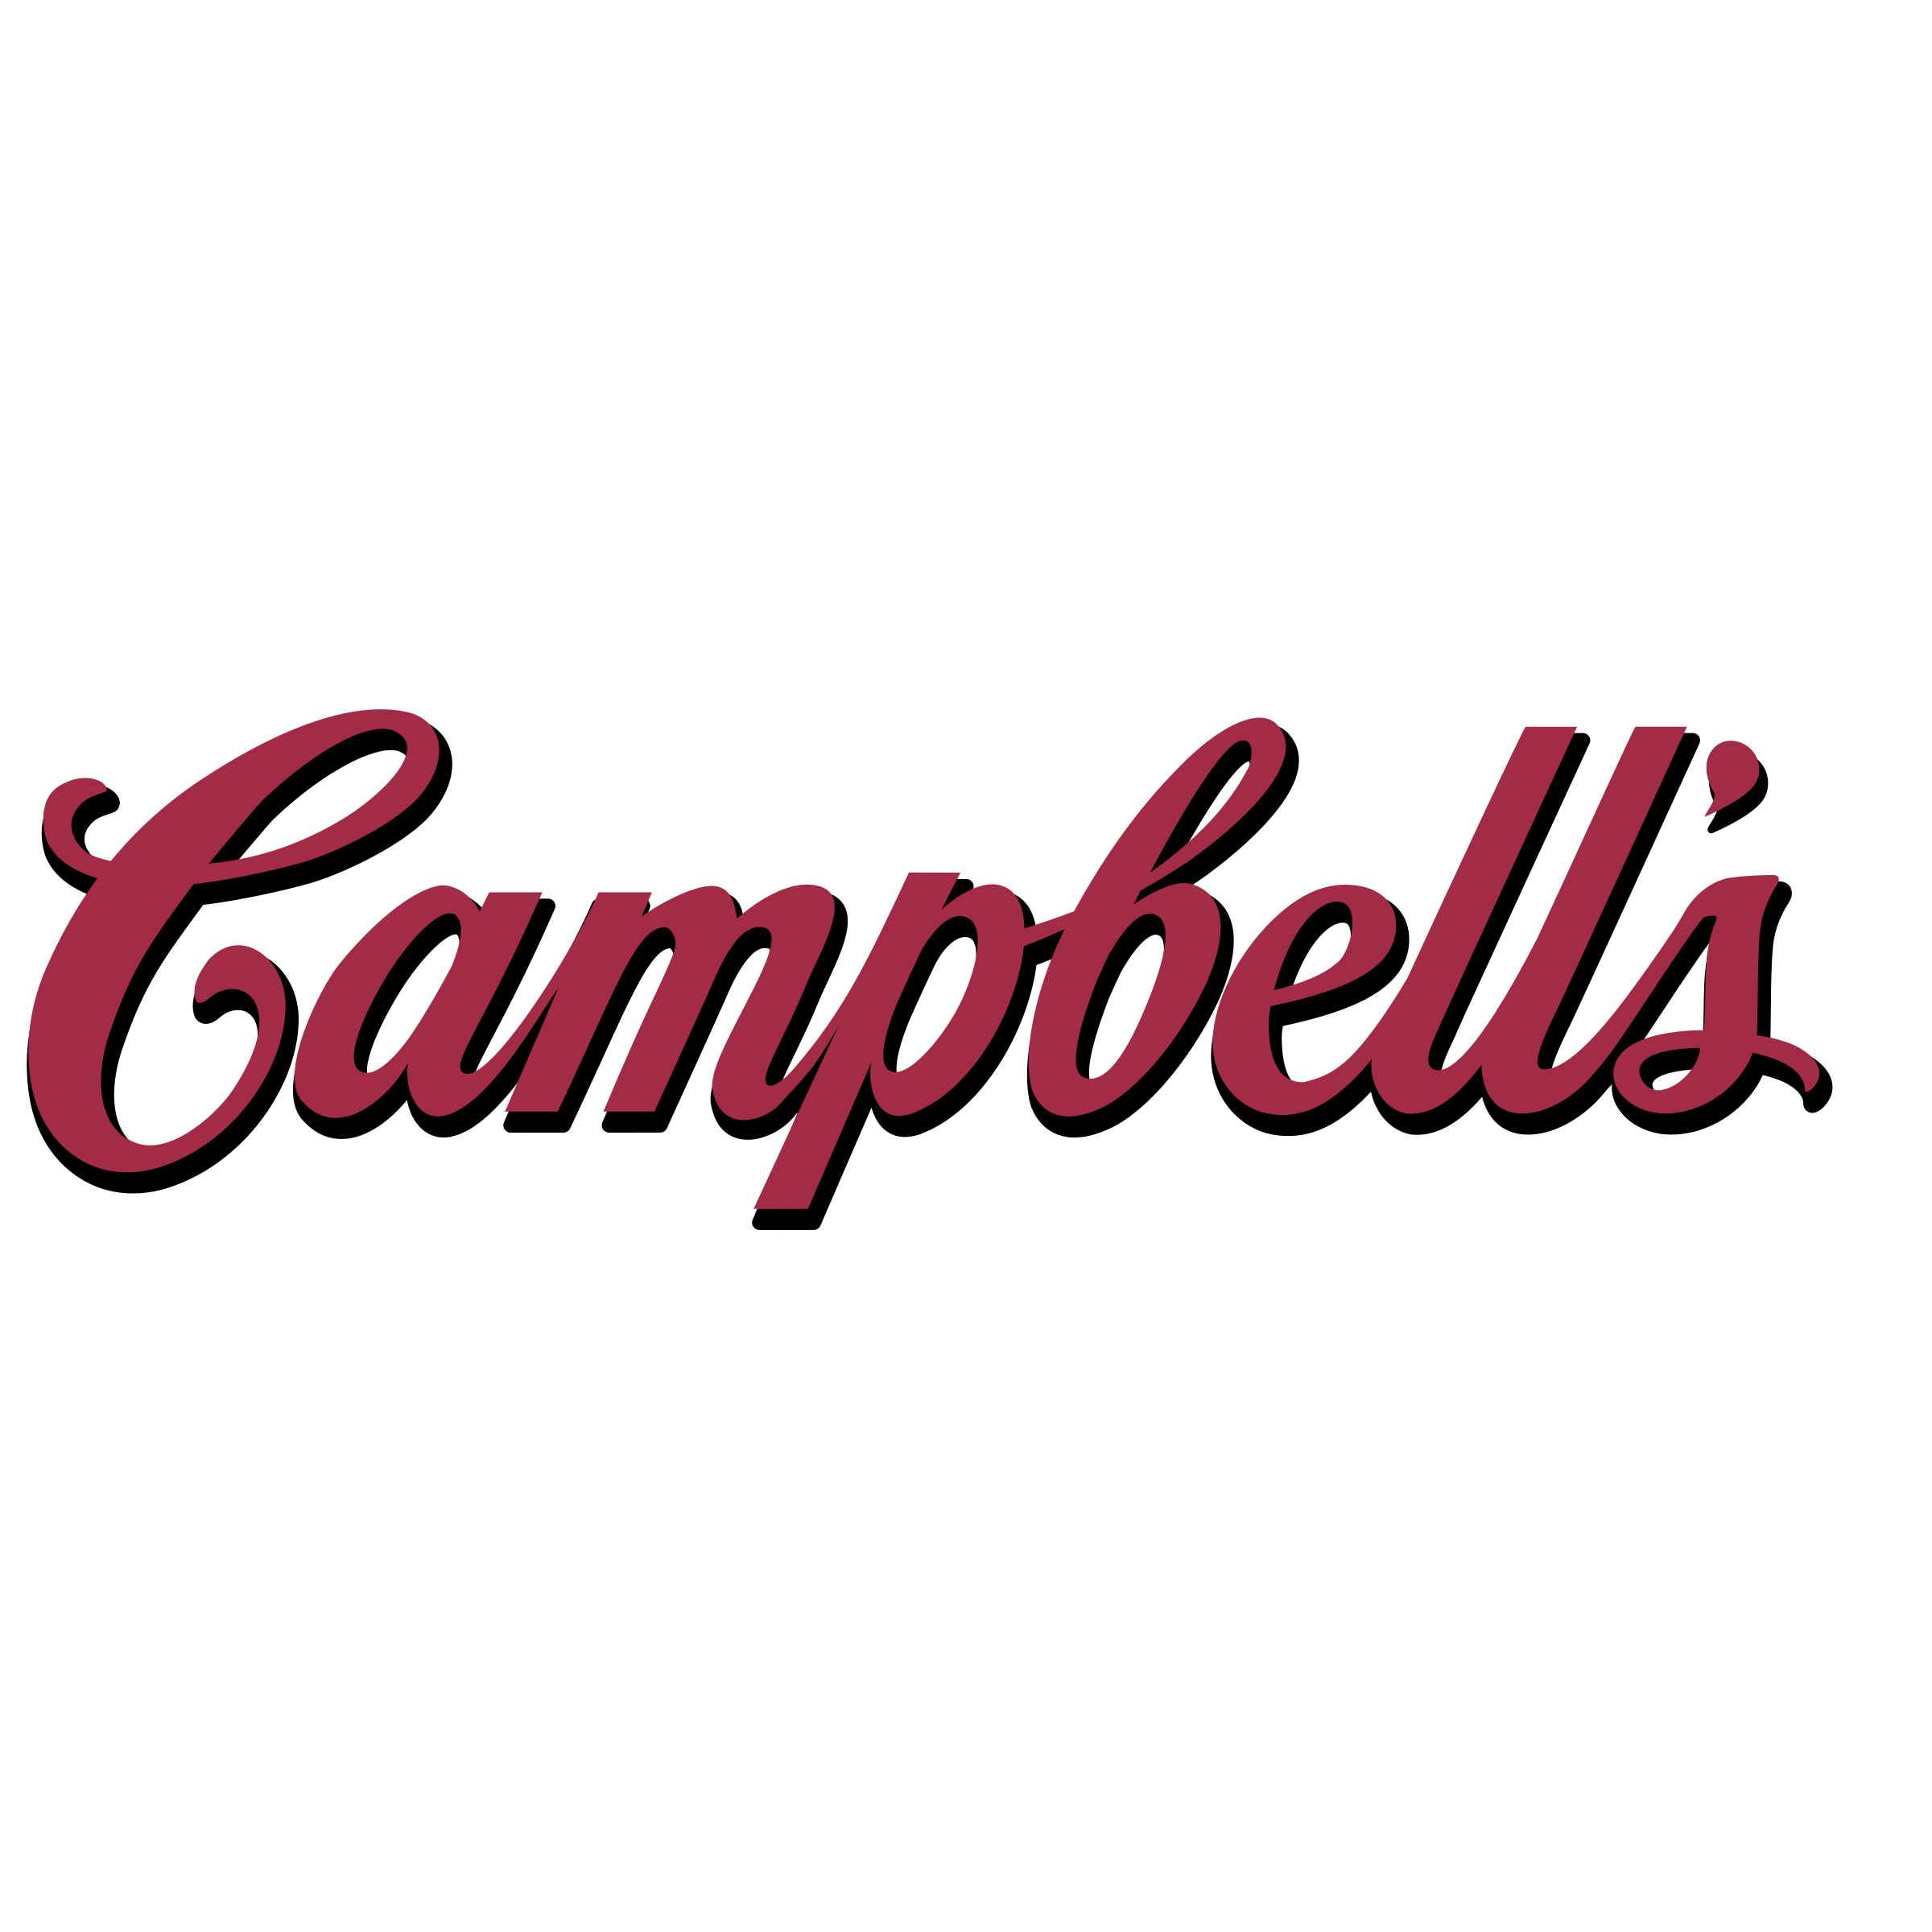 Campbell's Logo - Campbell's Logo PNG Transparent & SVG Vector - Freebie Supply